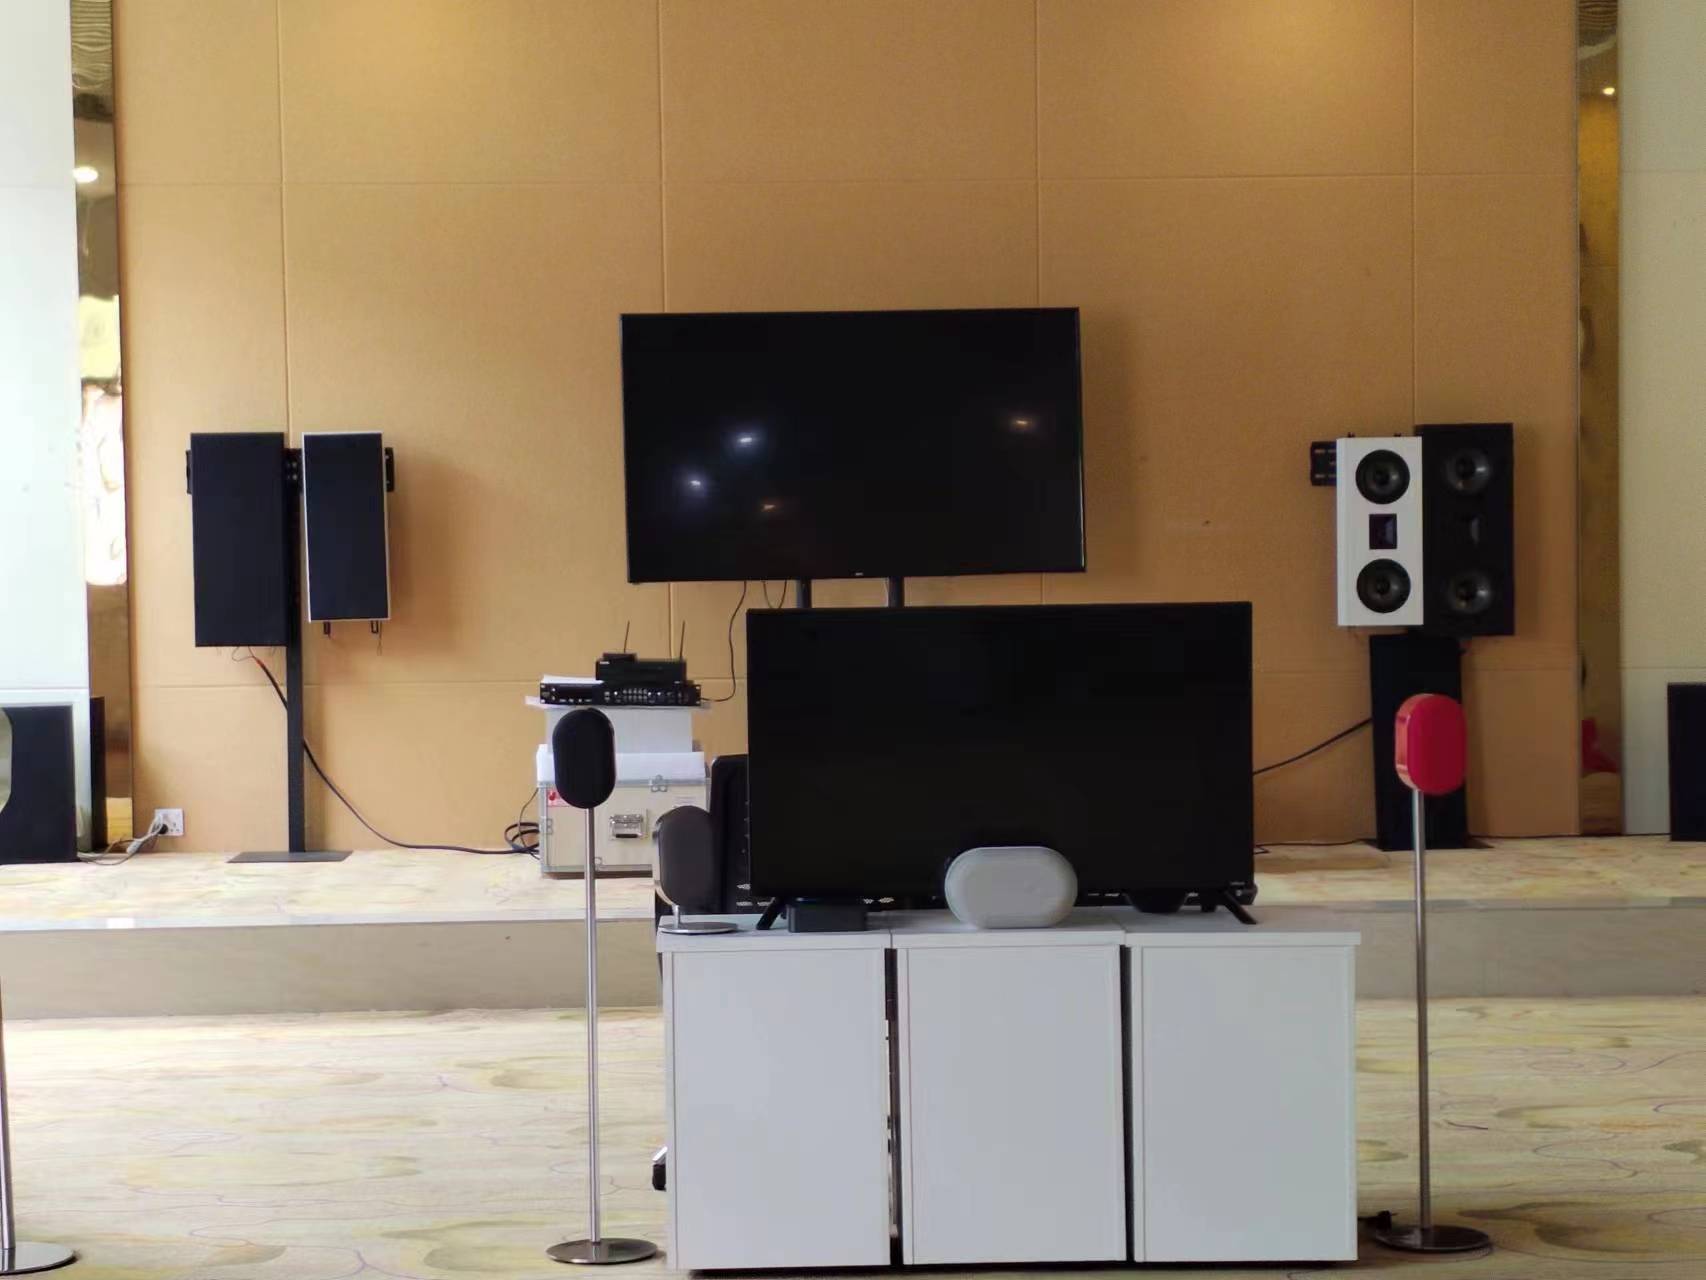  How much do you know about home theater speakers